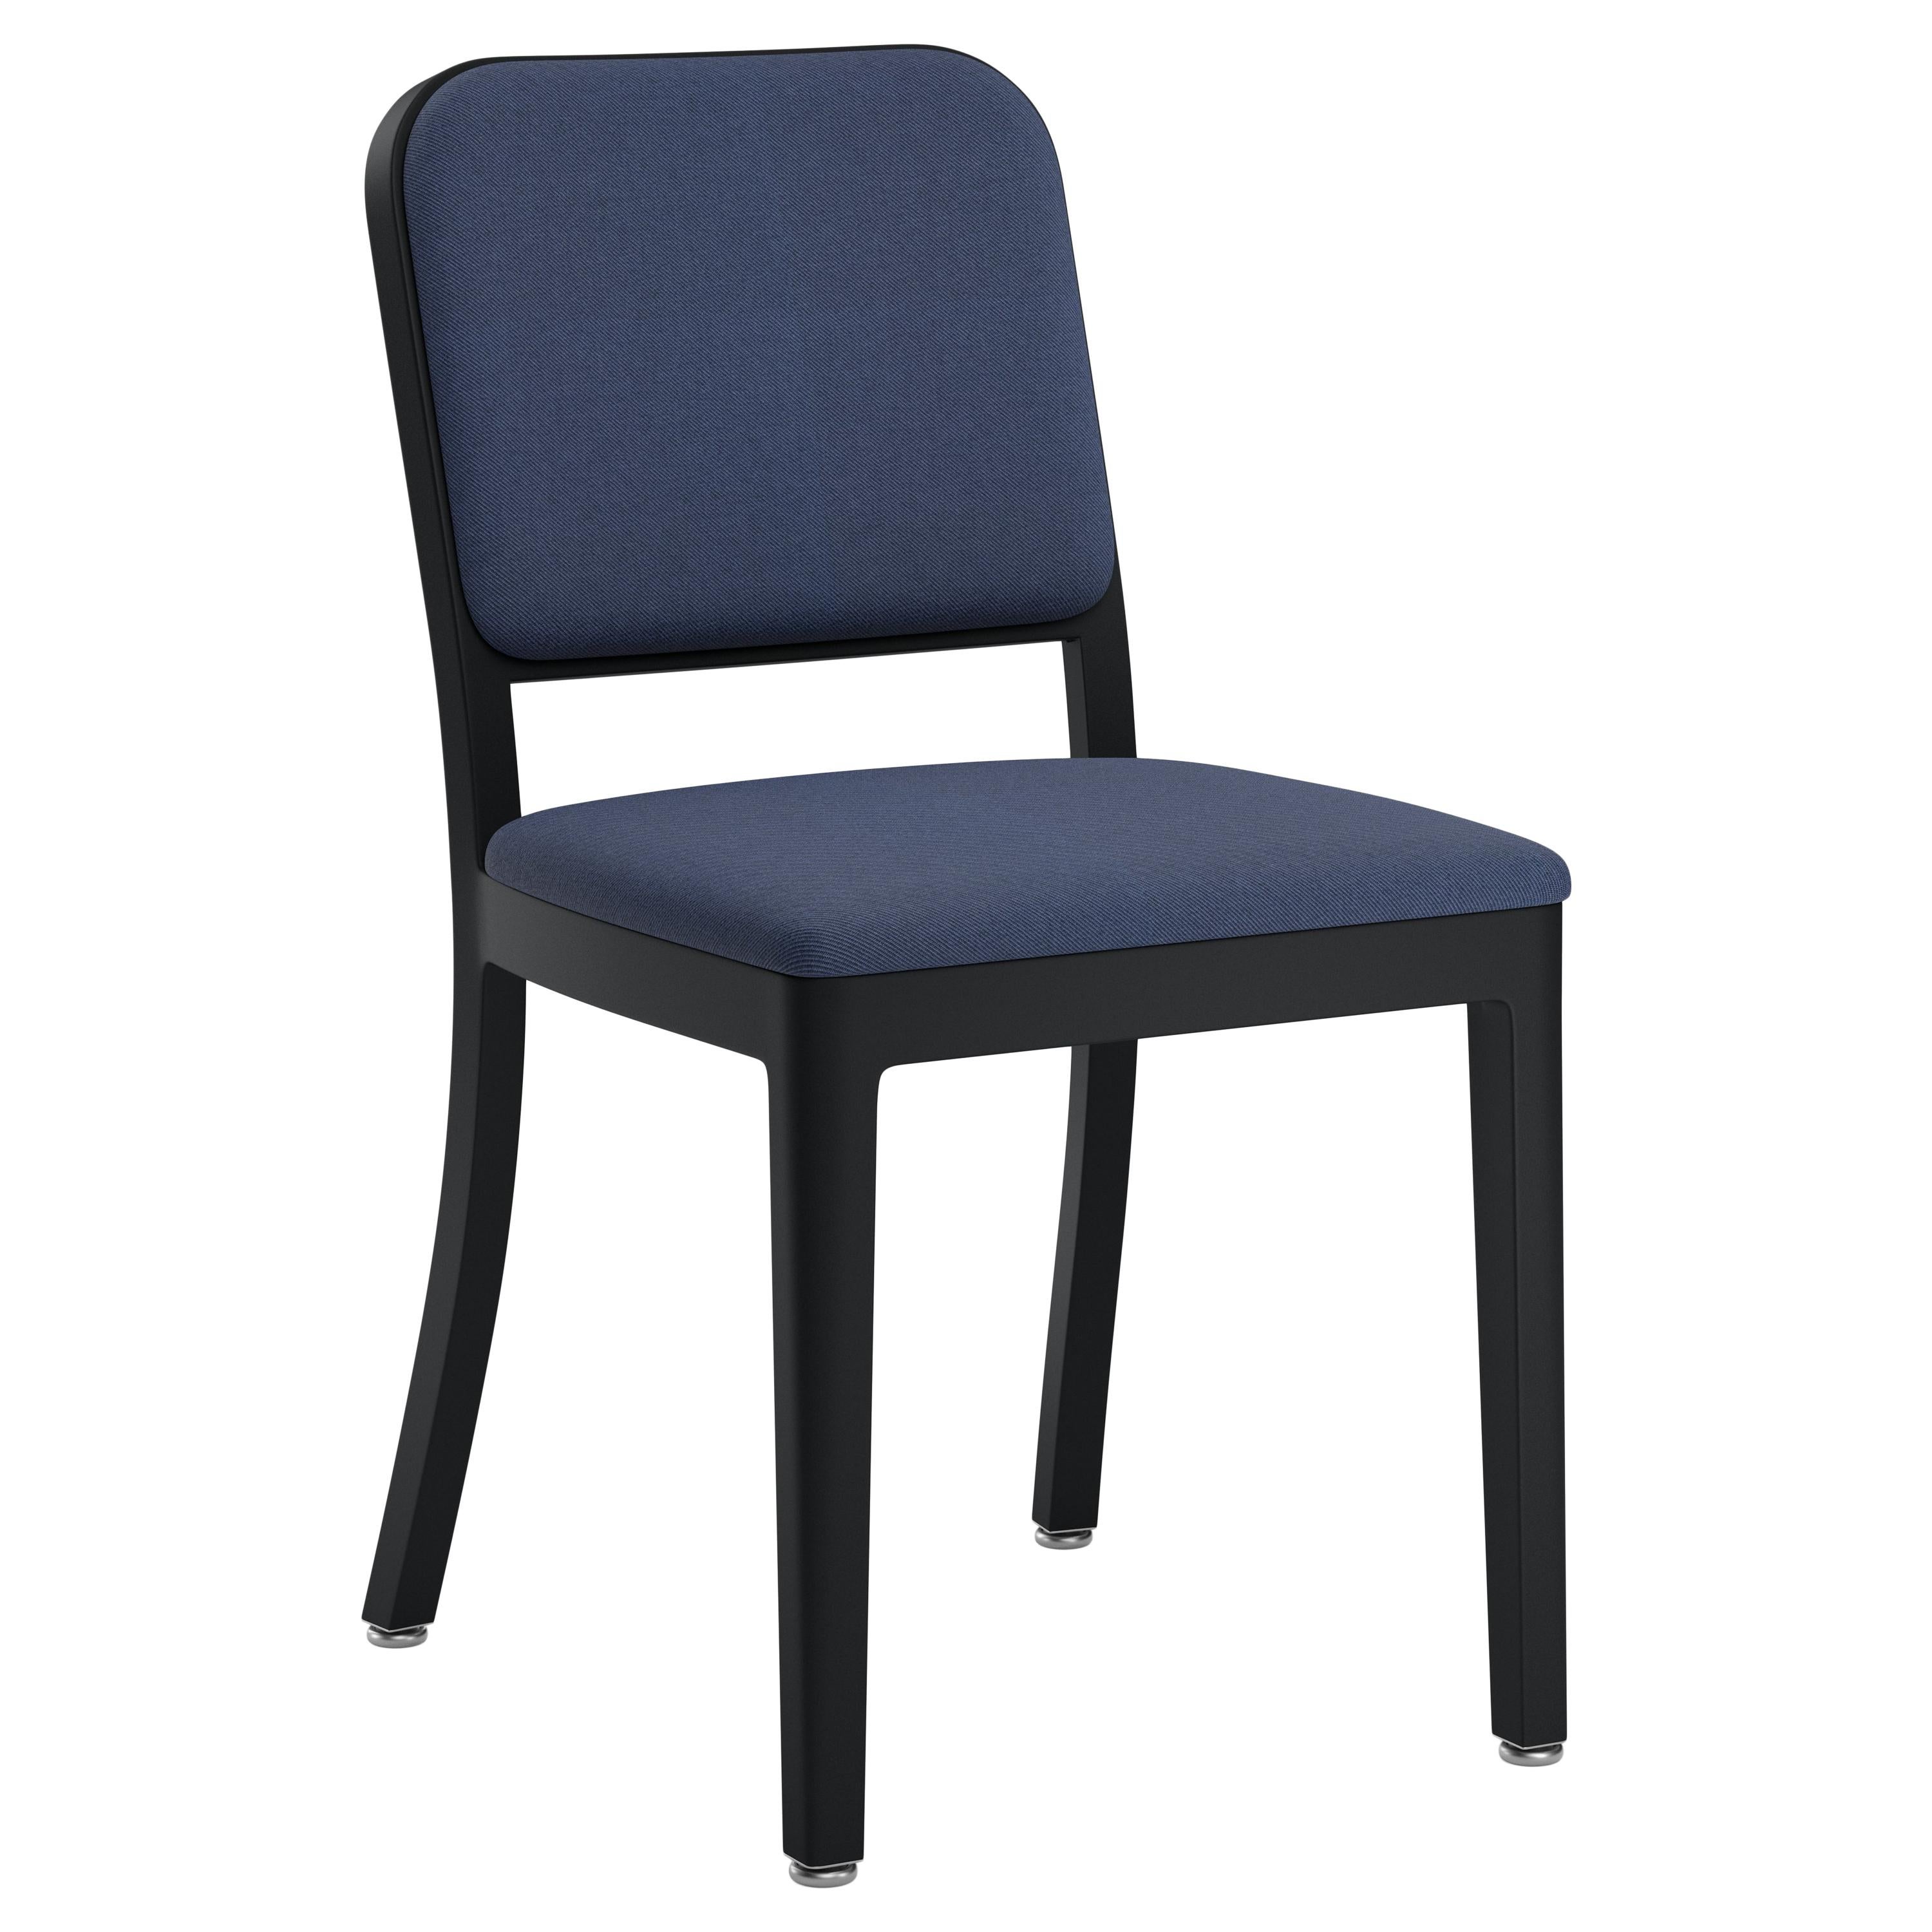 Emeco Navy Officer Side Chair in Navy Blue Fabric with Black Powder Coated Frame For Sale